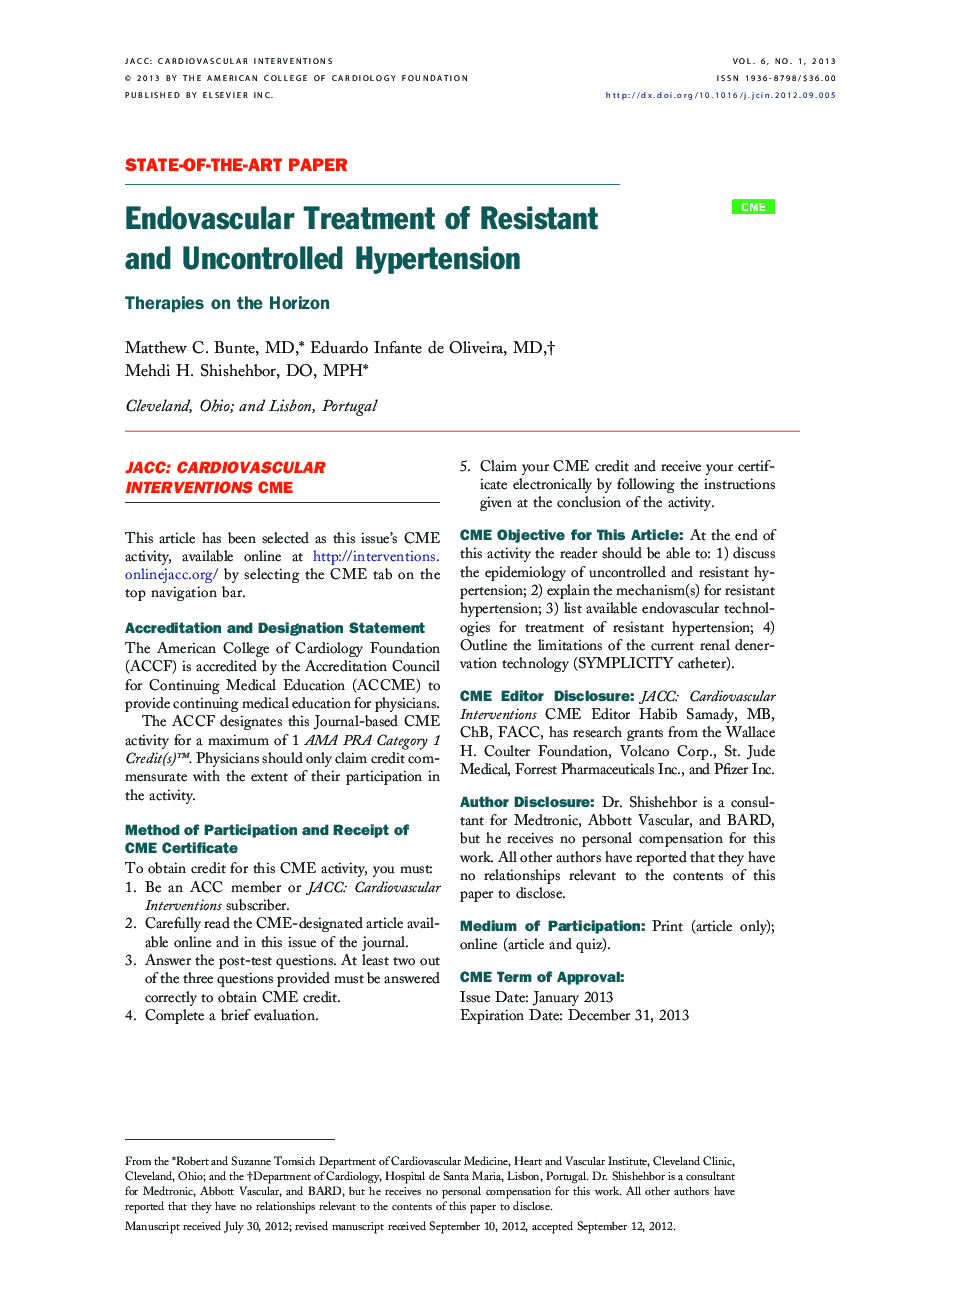 Endovascular Treatment of Resistant and Uncontrolled Hypertension : Therapies on the Horizon